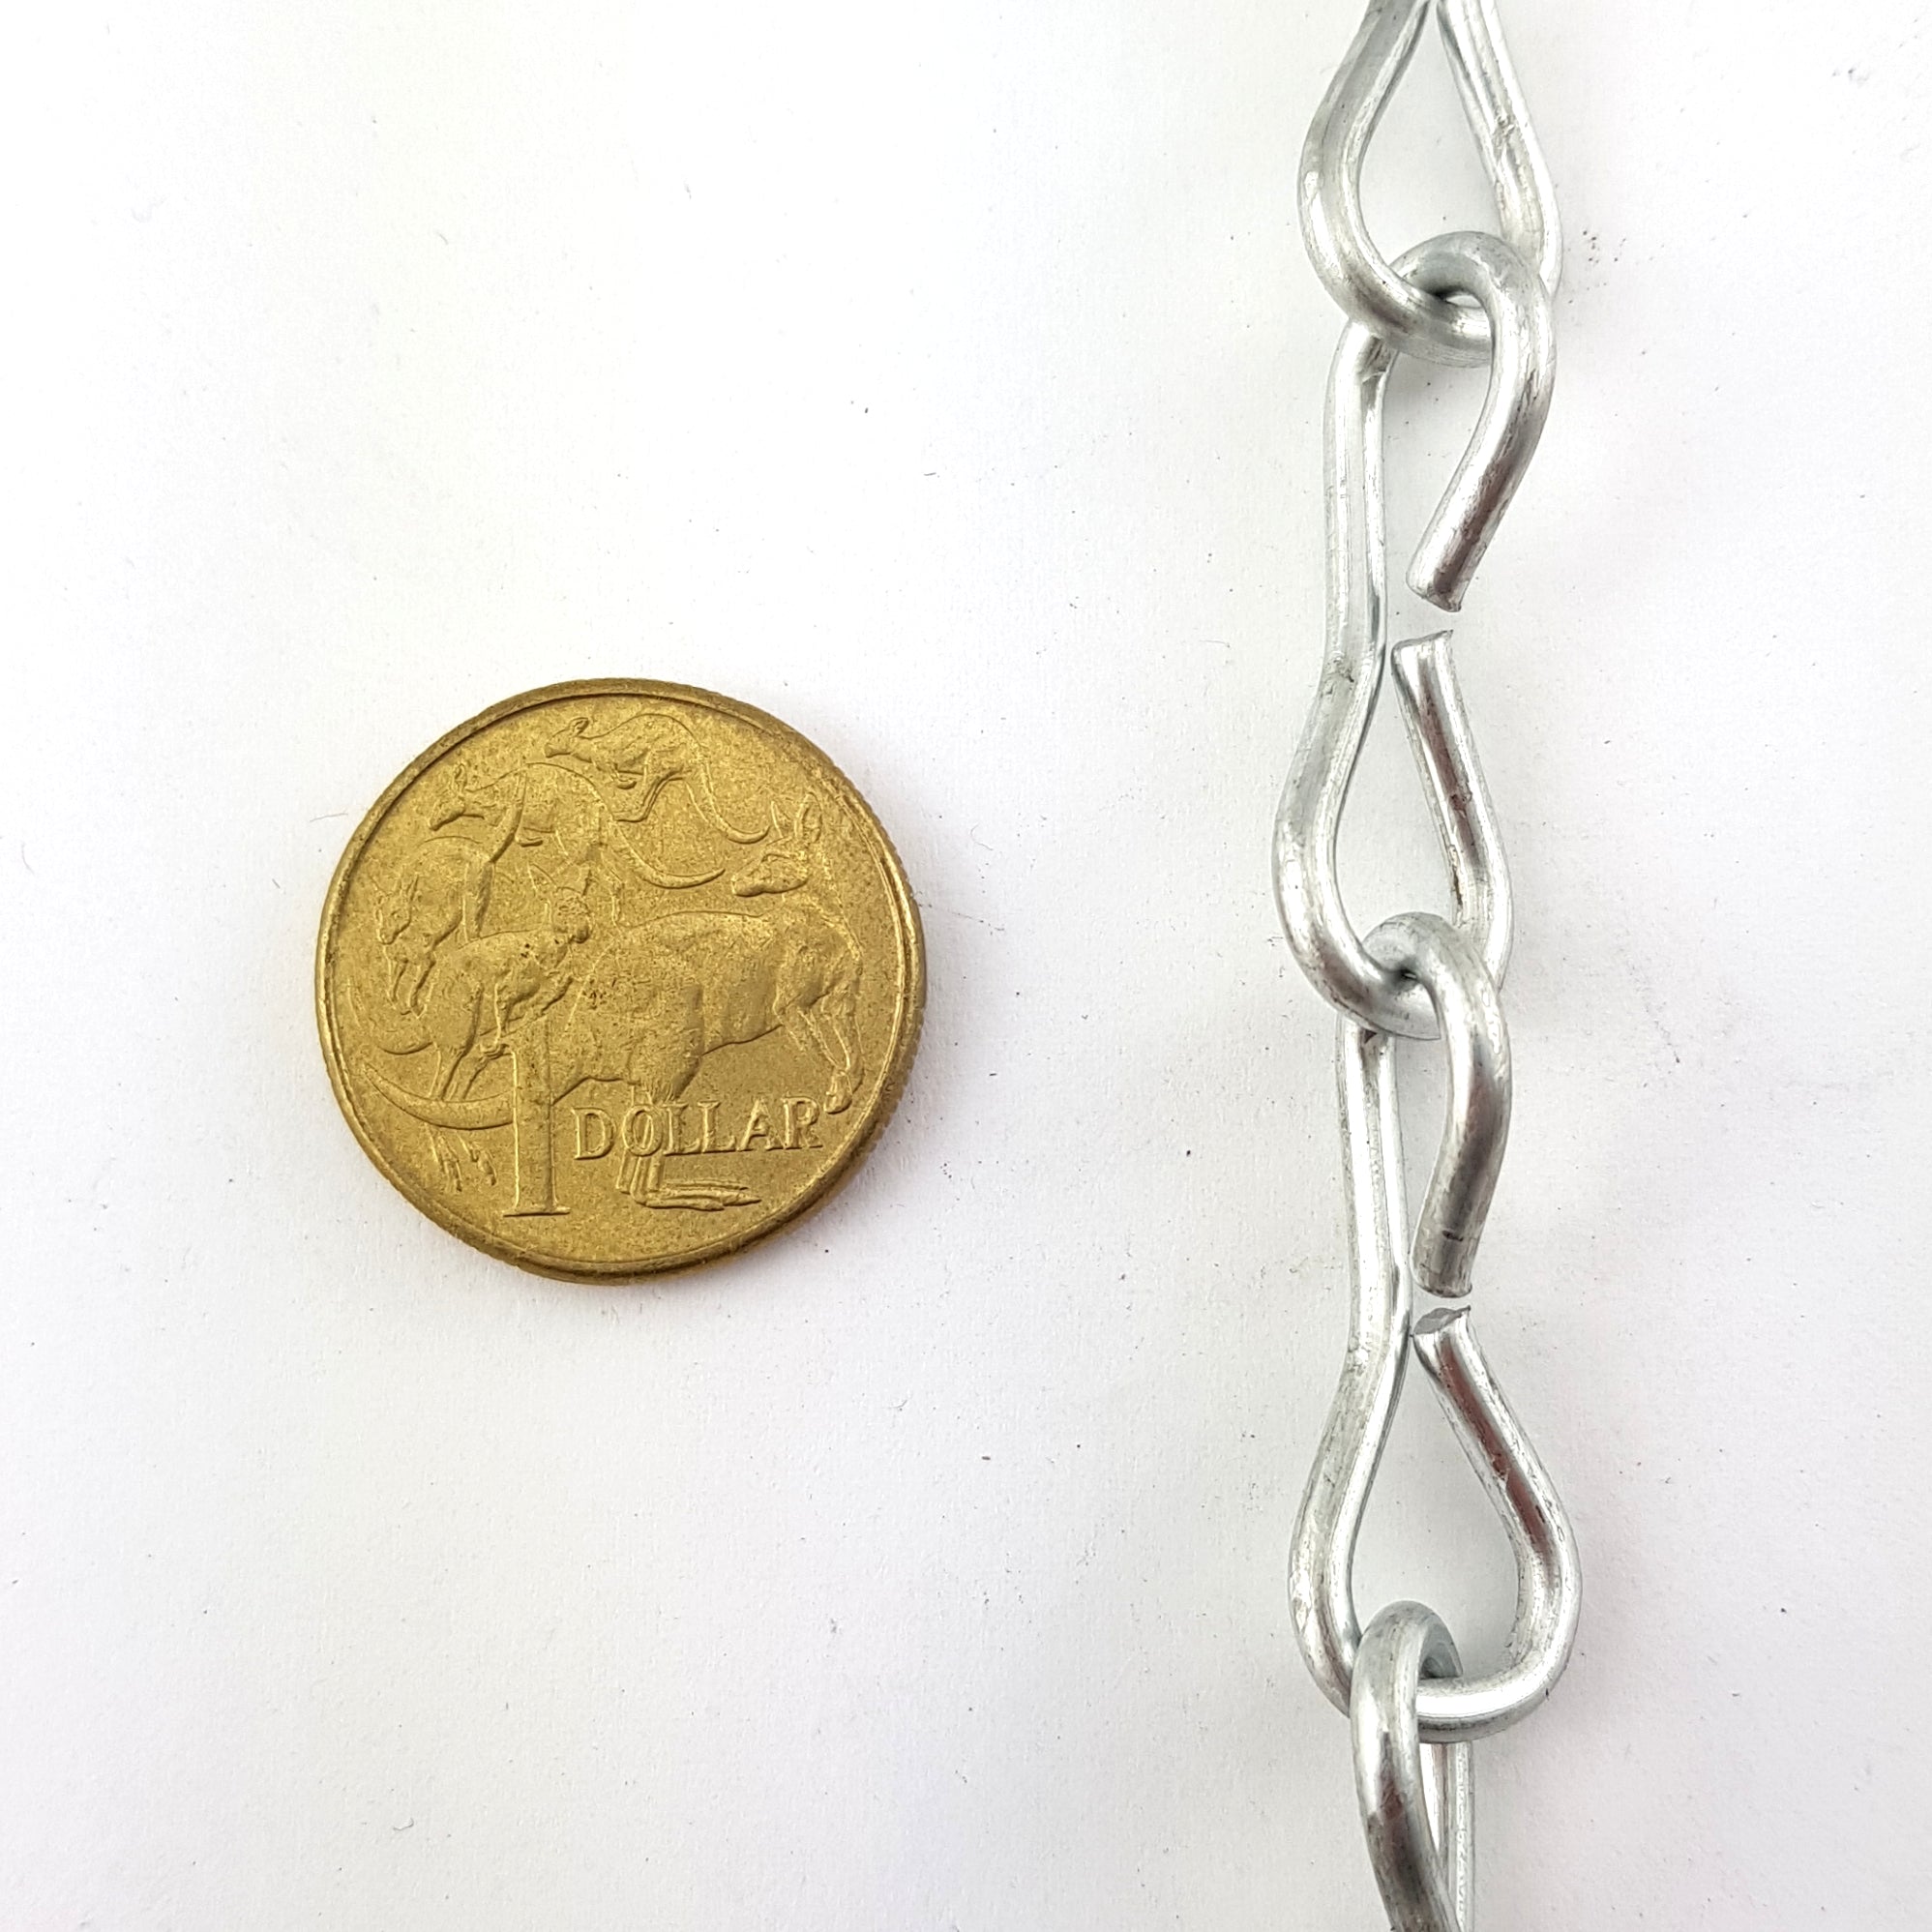 Australian made Single Jack Chain in galvanised finish, quantity 30 metres supplied in a bucket. Melbourne, Australia.